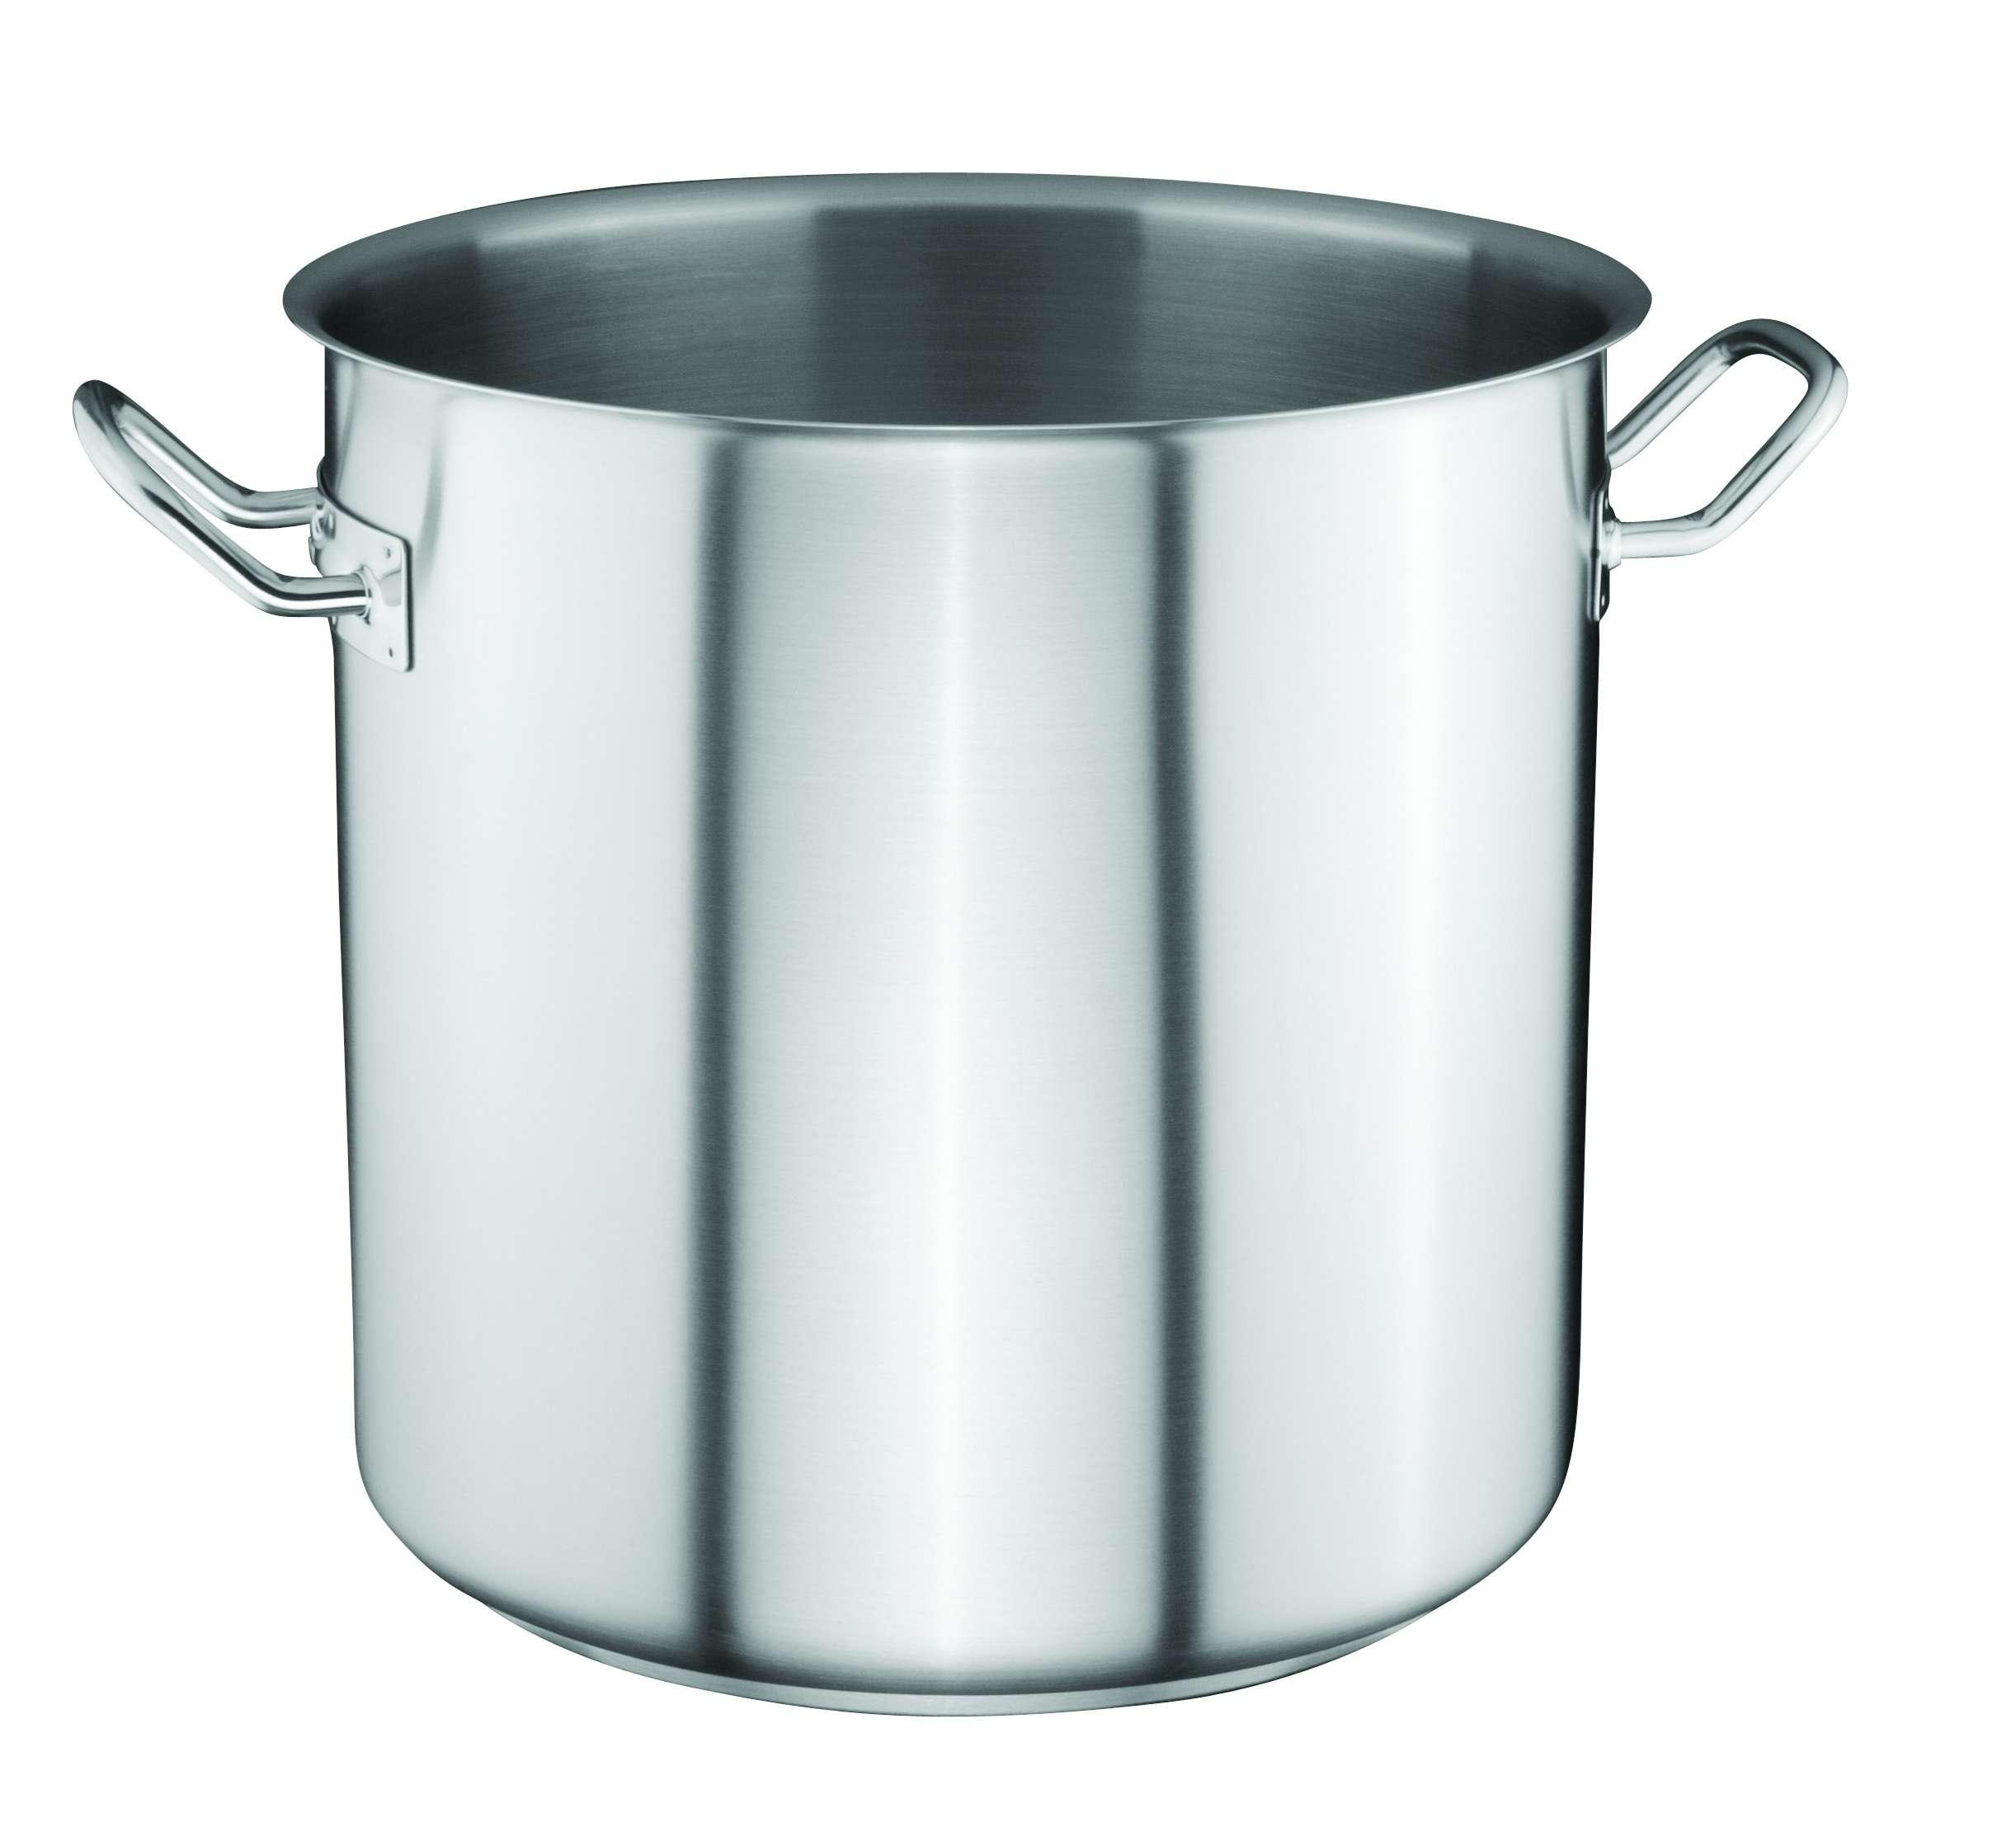 Ozti Stainless Steel Stock Pot 28 cm x 28 cm Silver Stainless Steel